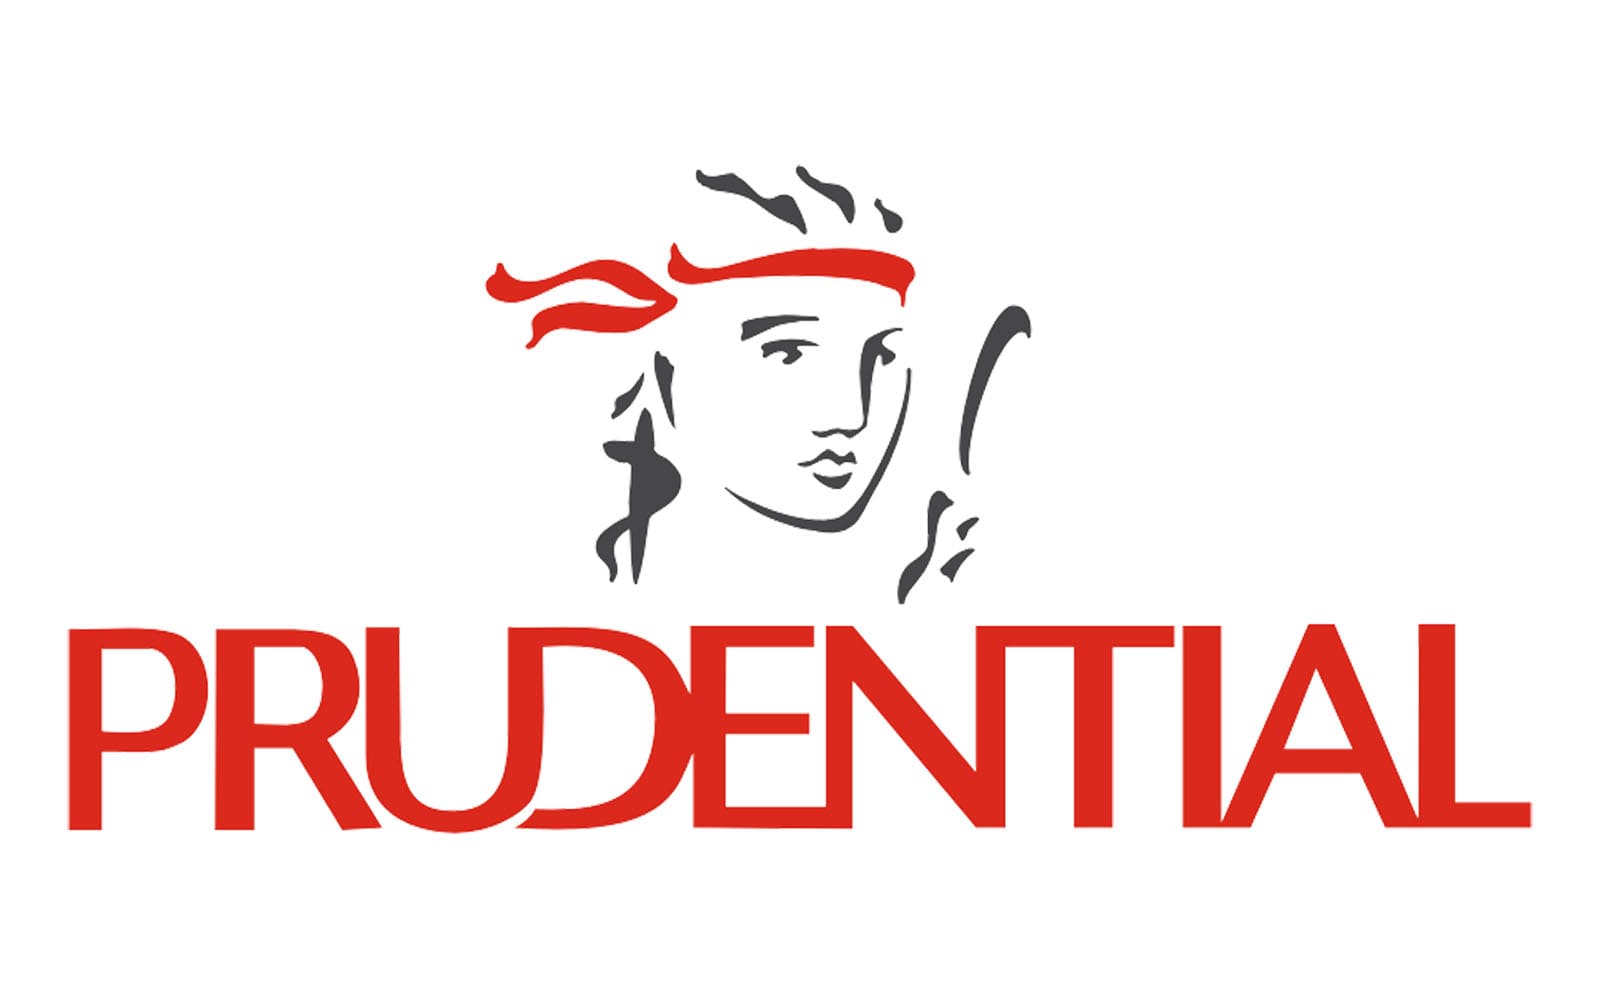 Prudential financial logo investing in real estate securities